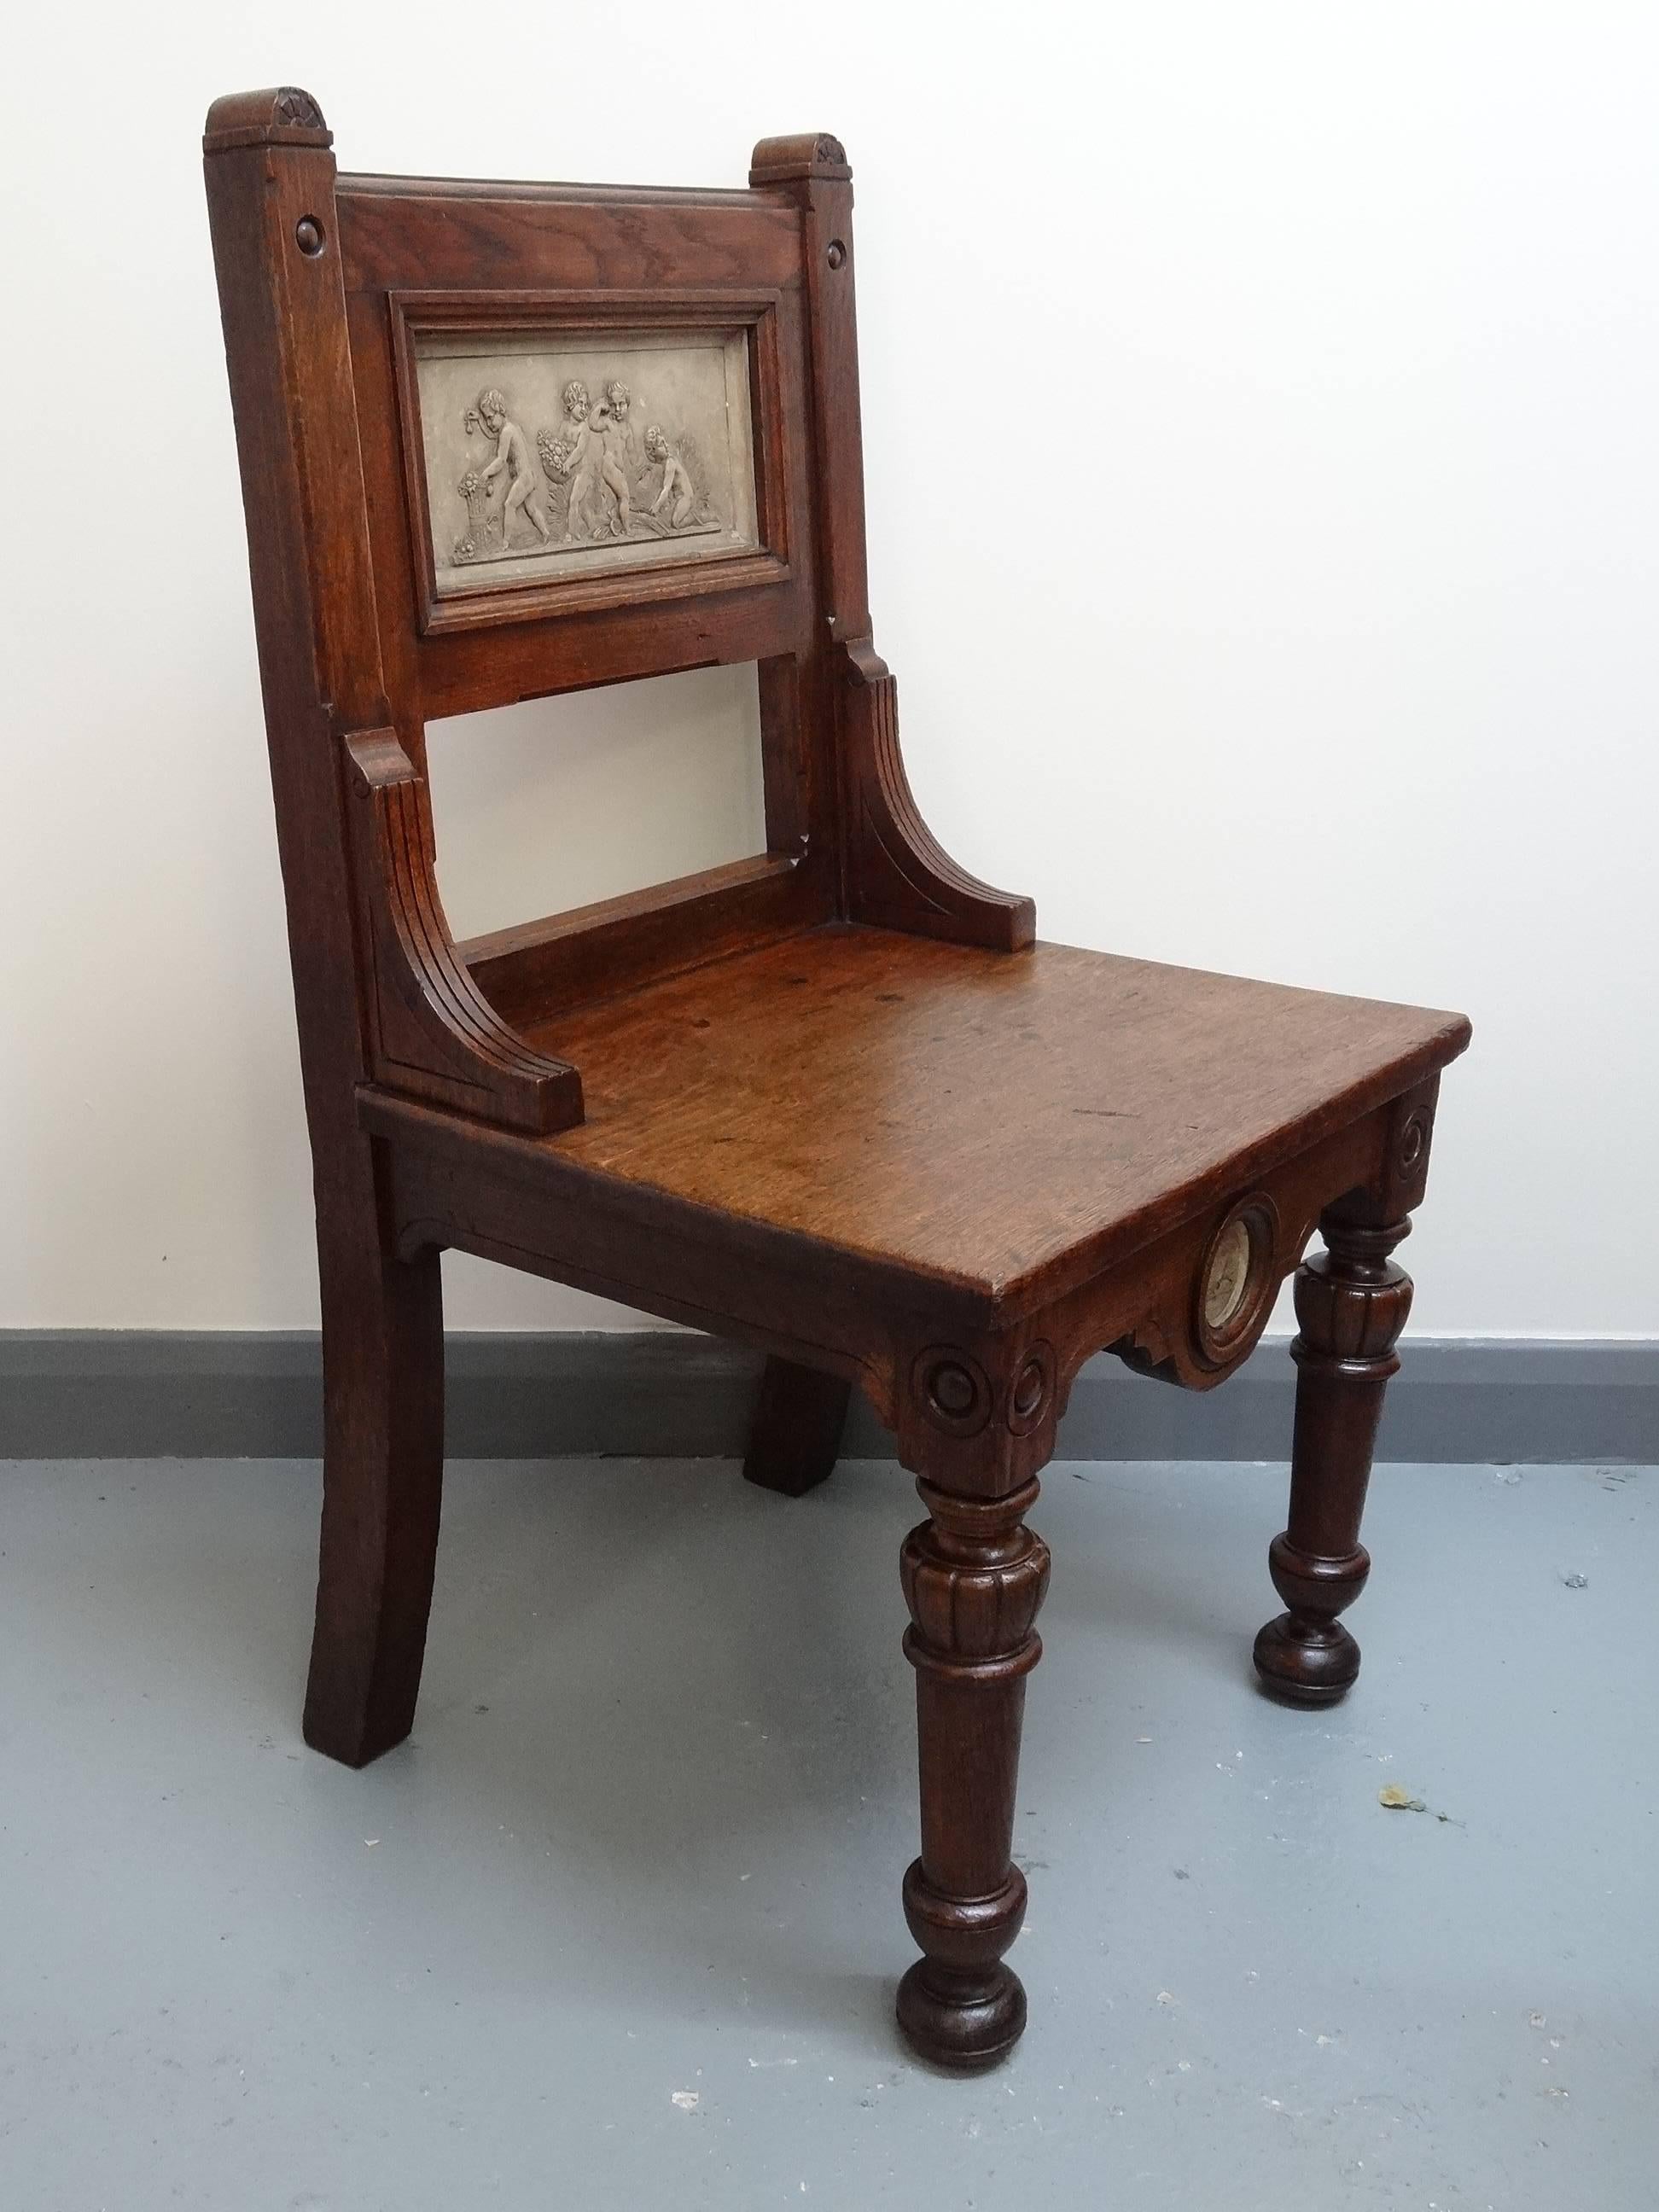 British Arts and Crafts Gillows oak hall chair with putti plaster panels circa 1880s For Sale